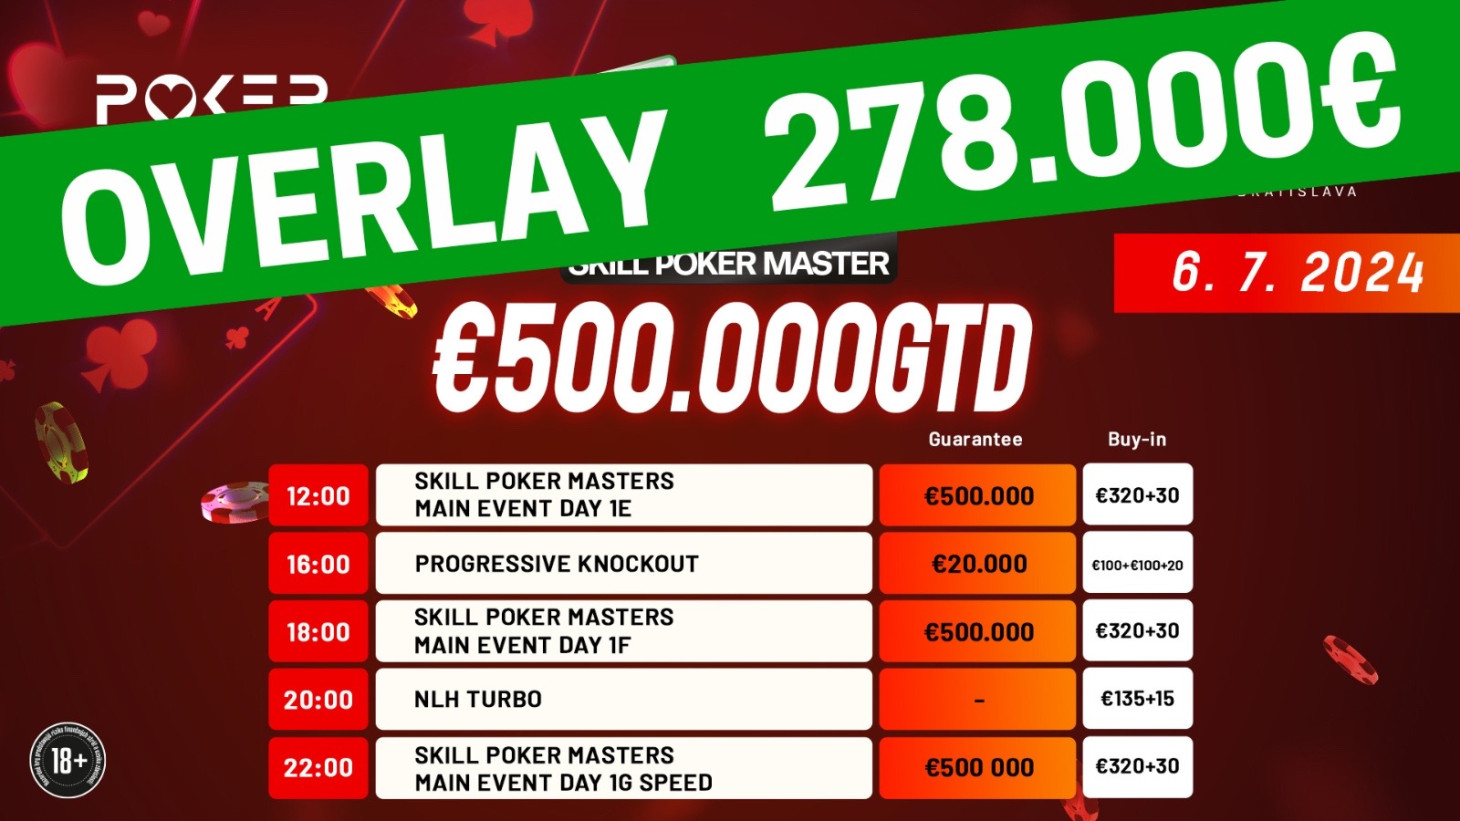 It's here. The Skill Poker Masters kicks off with the €500,000 GTD Main Event!